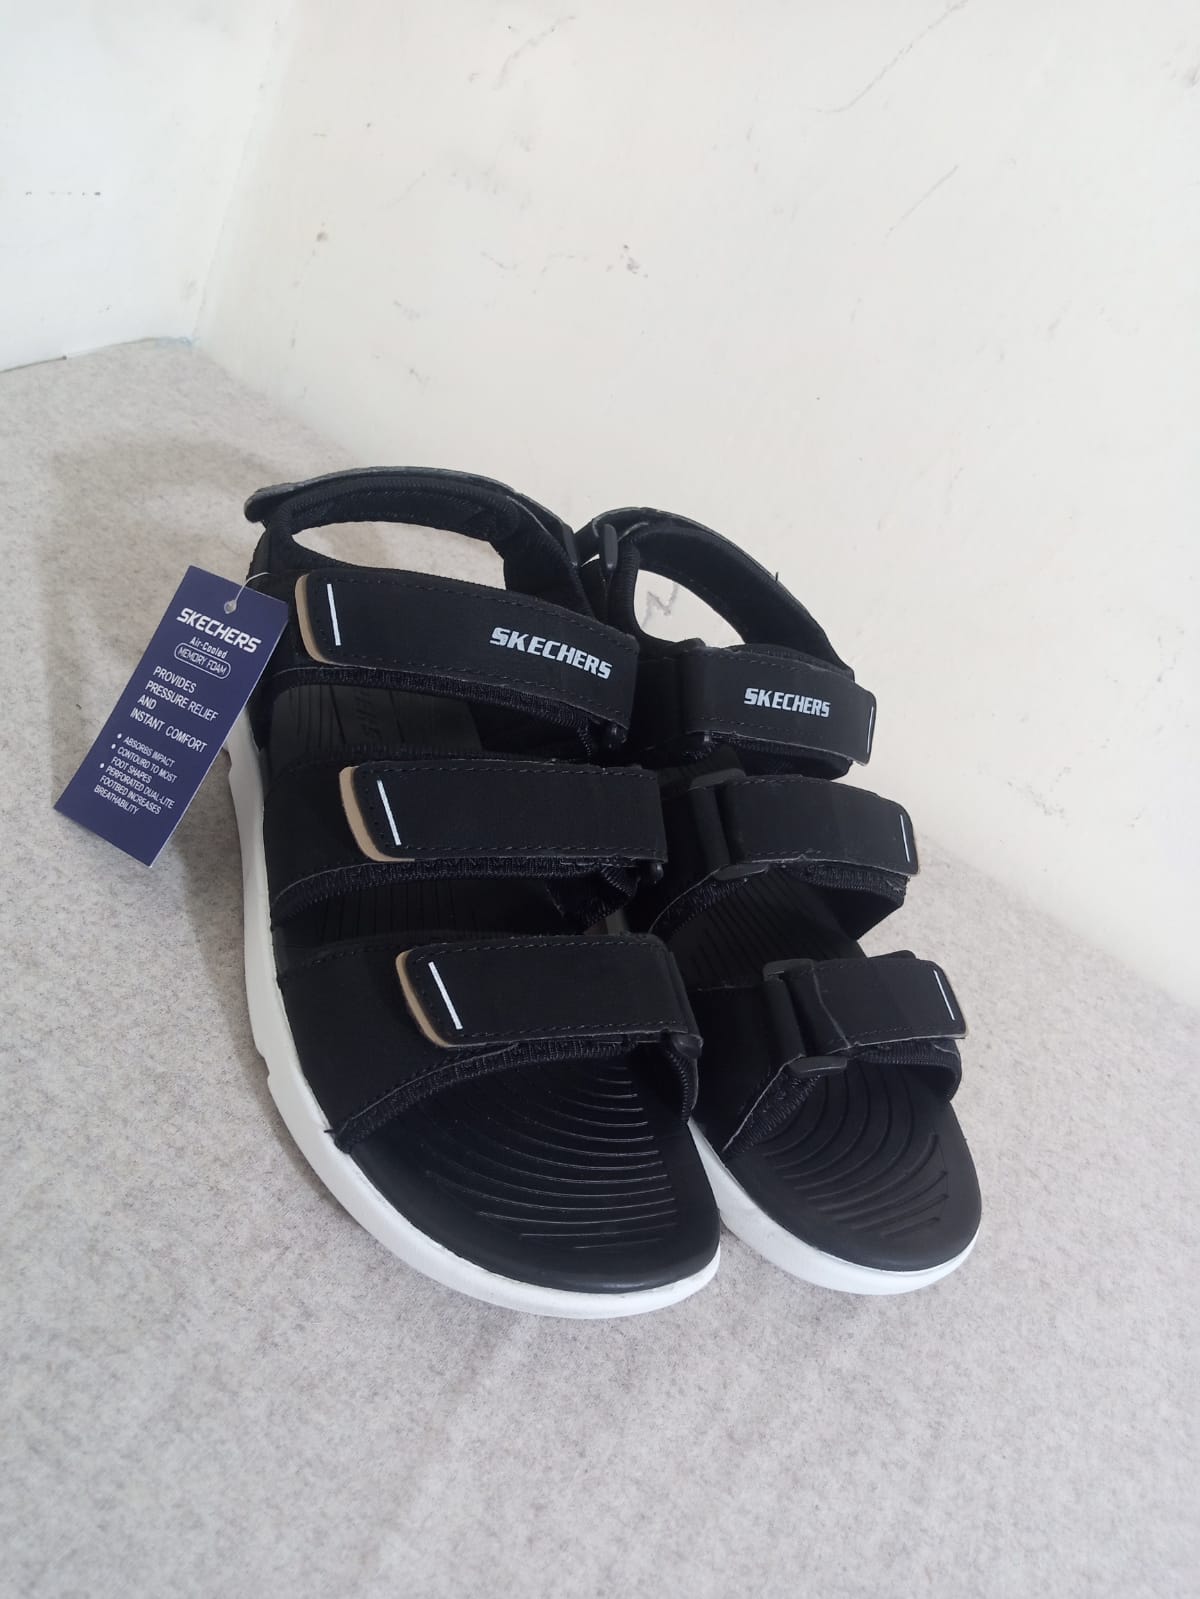 Classic Black Sandals: Timeless Style, Ultimate Comfort!"  "Sleek Black Strap Sandals: Step into Sophistication!"  "Black Beauty Sandals: Walk with Confidence & Elegance!"  "Luxurious Black Sandals: Comfort Redefined, Style Amplified!